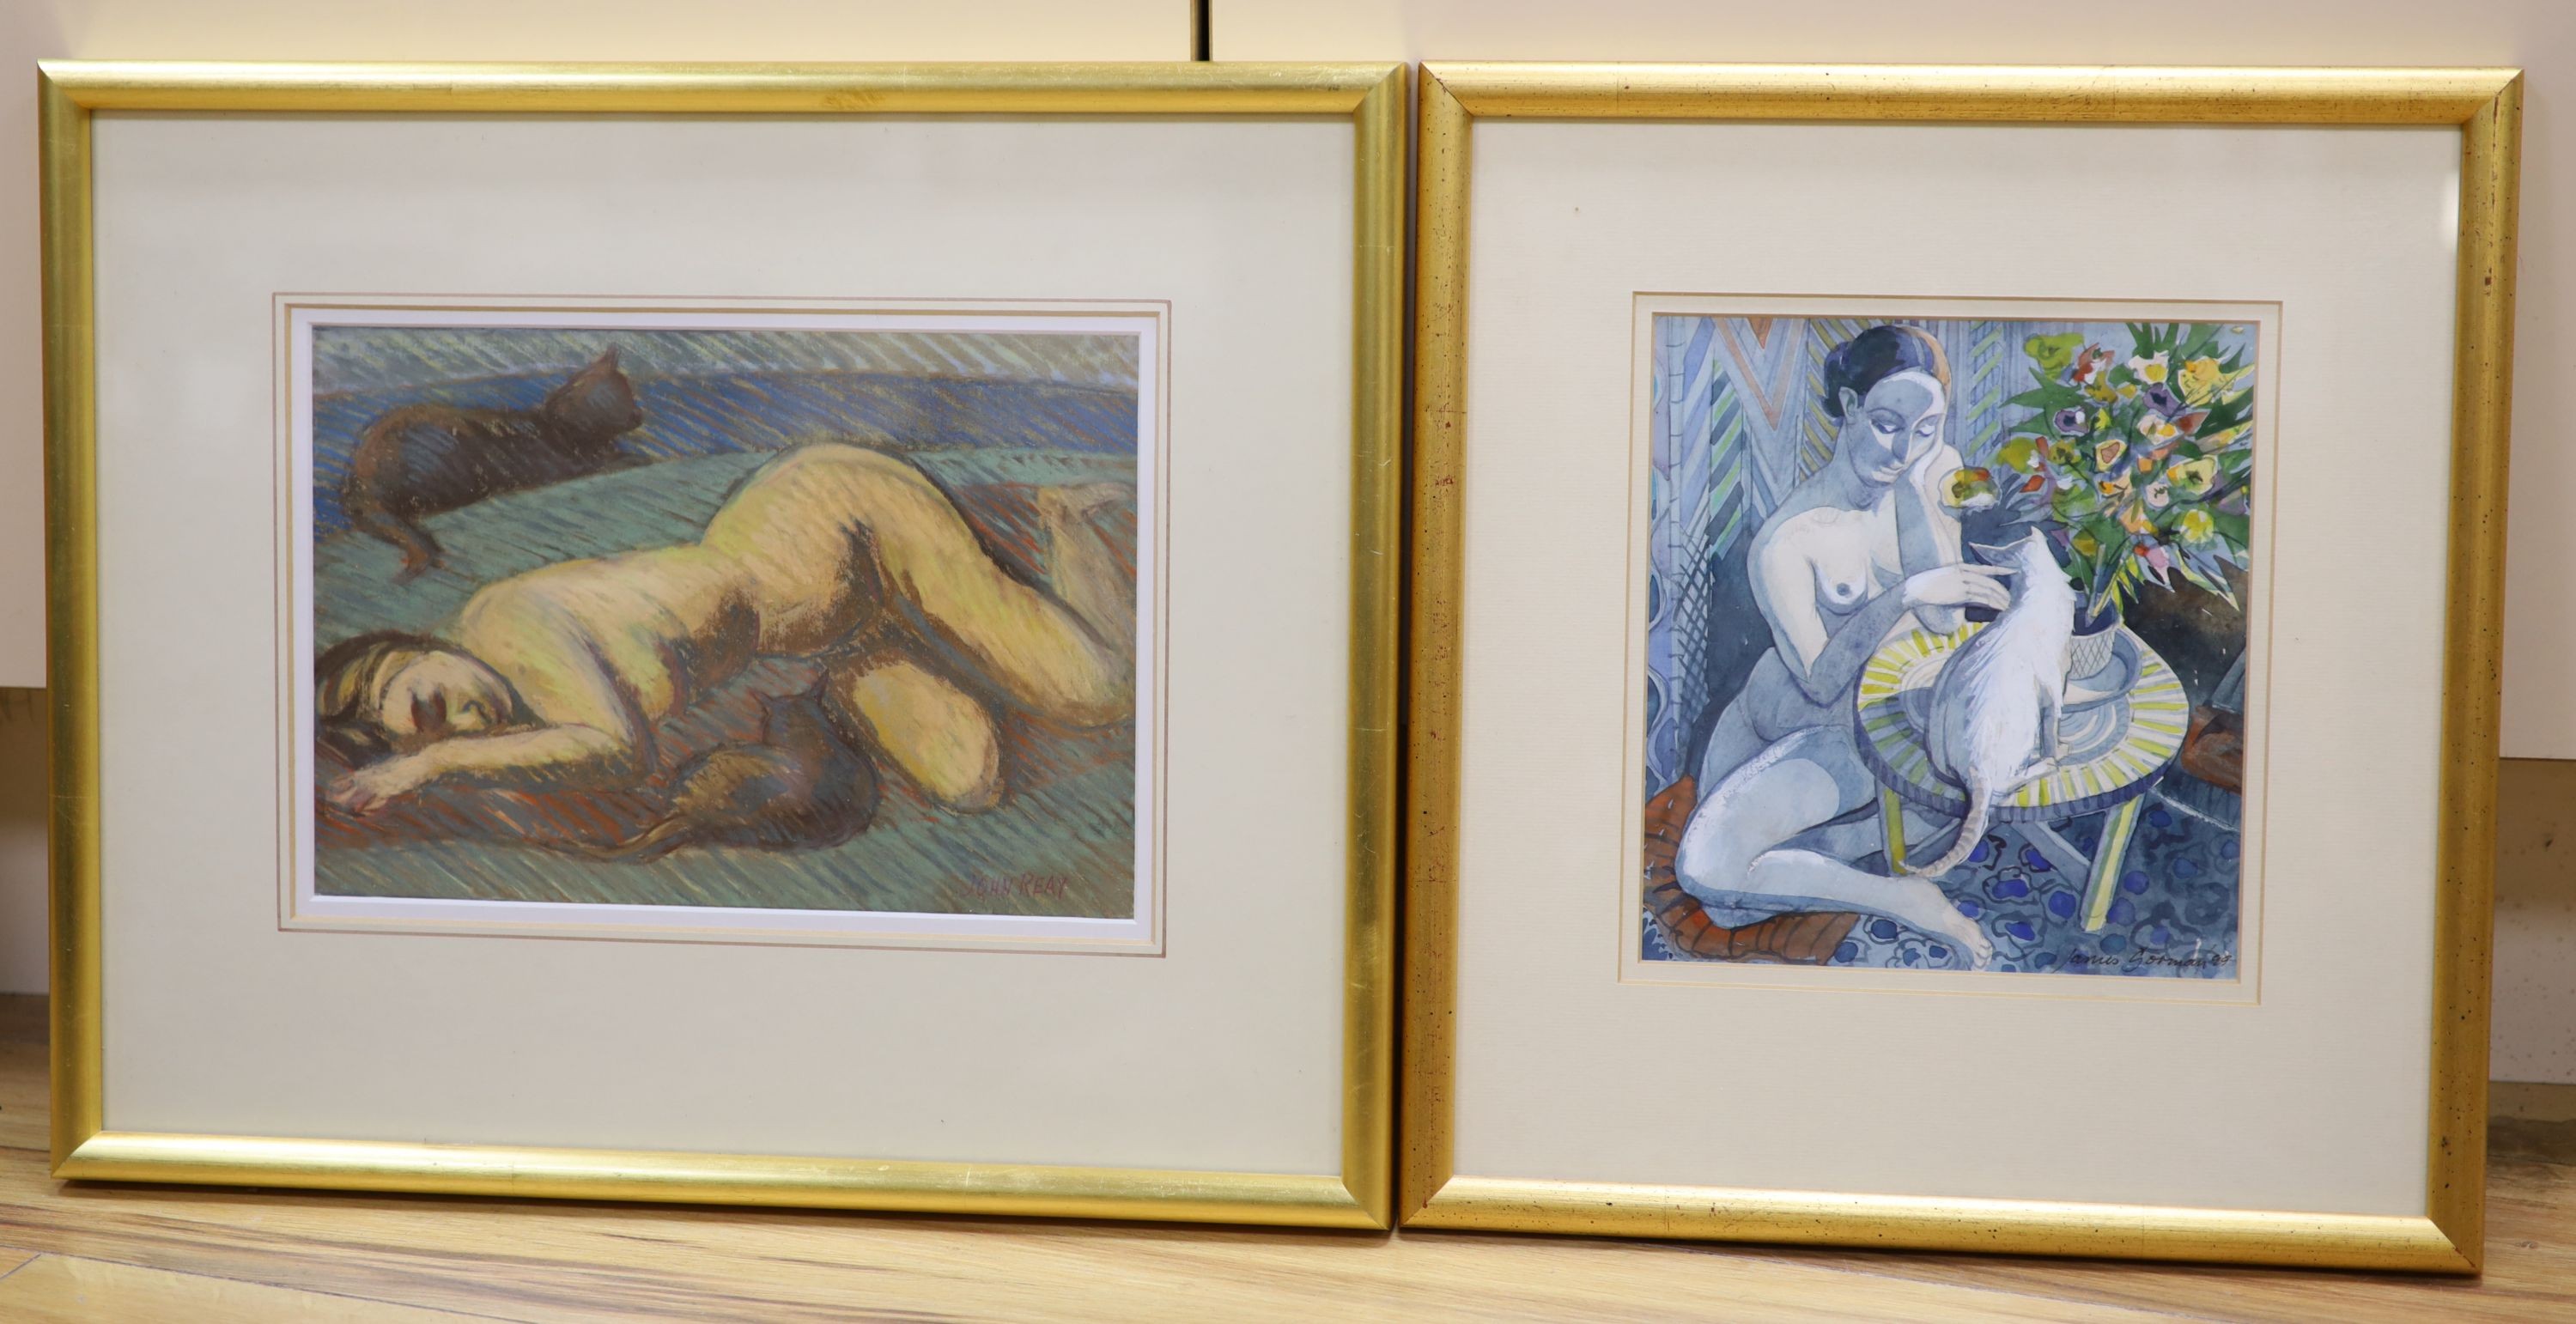 John Reay (1947-2011), pastel, reclining nude , 19 x 27cm. and James Gorman (1931-2005), watercolour, nude with cat, 20 x 18cm.                                                                                             